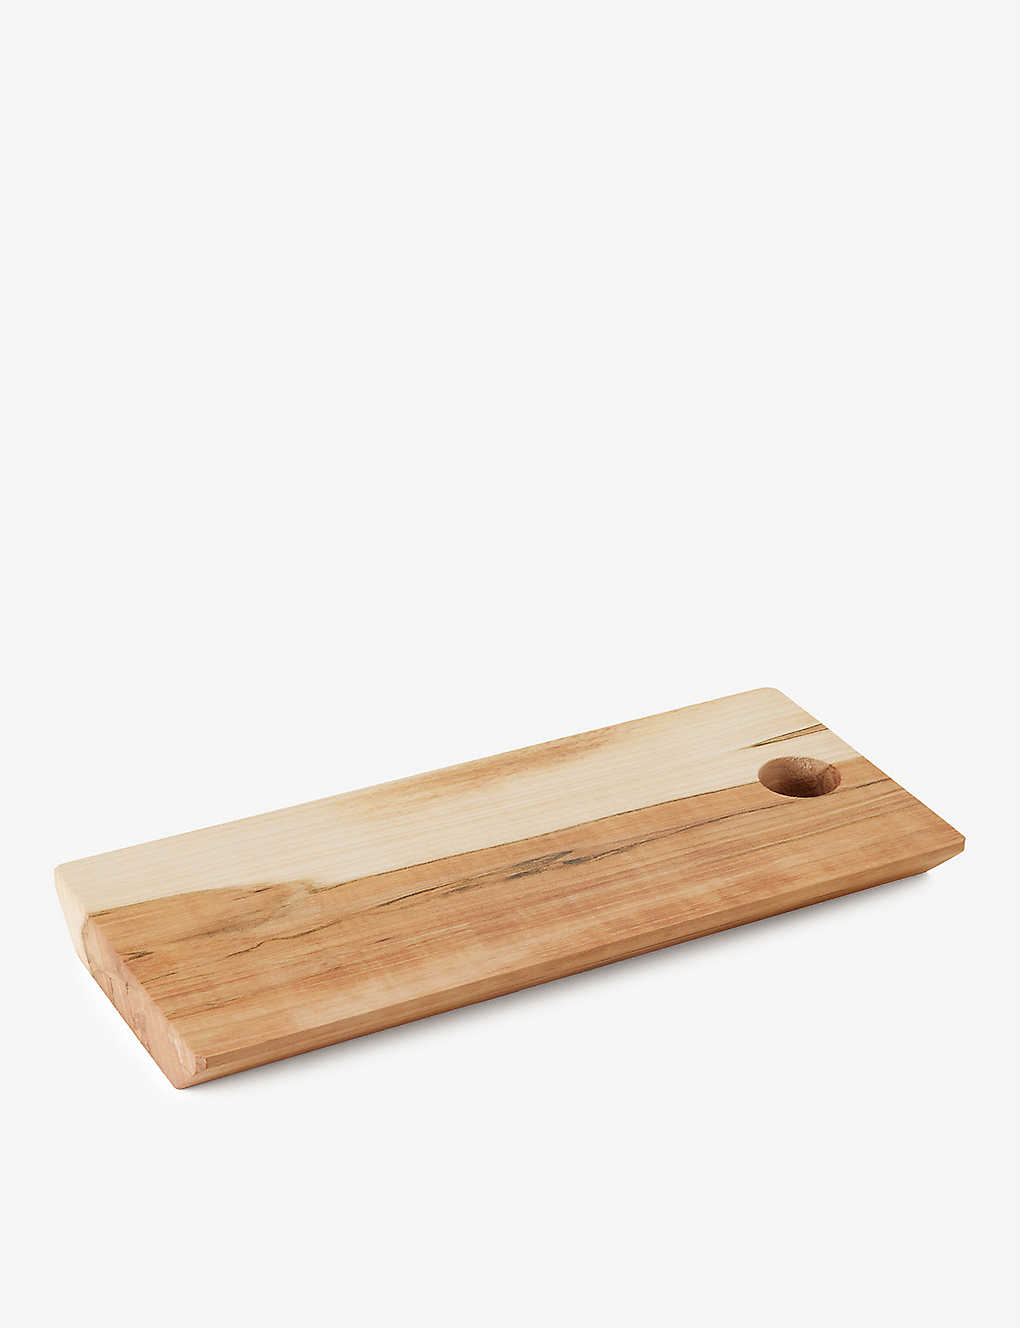 Goldfinger Grained Upcycled Sycamore-wood Serving Board 35cm